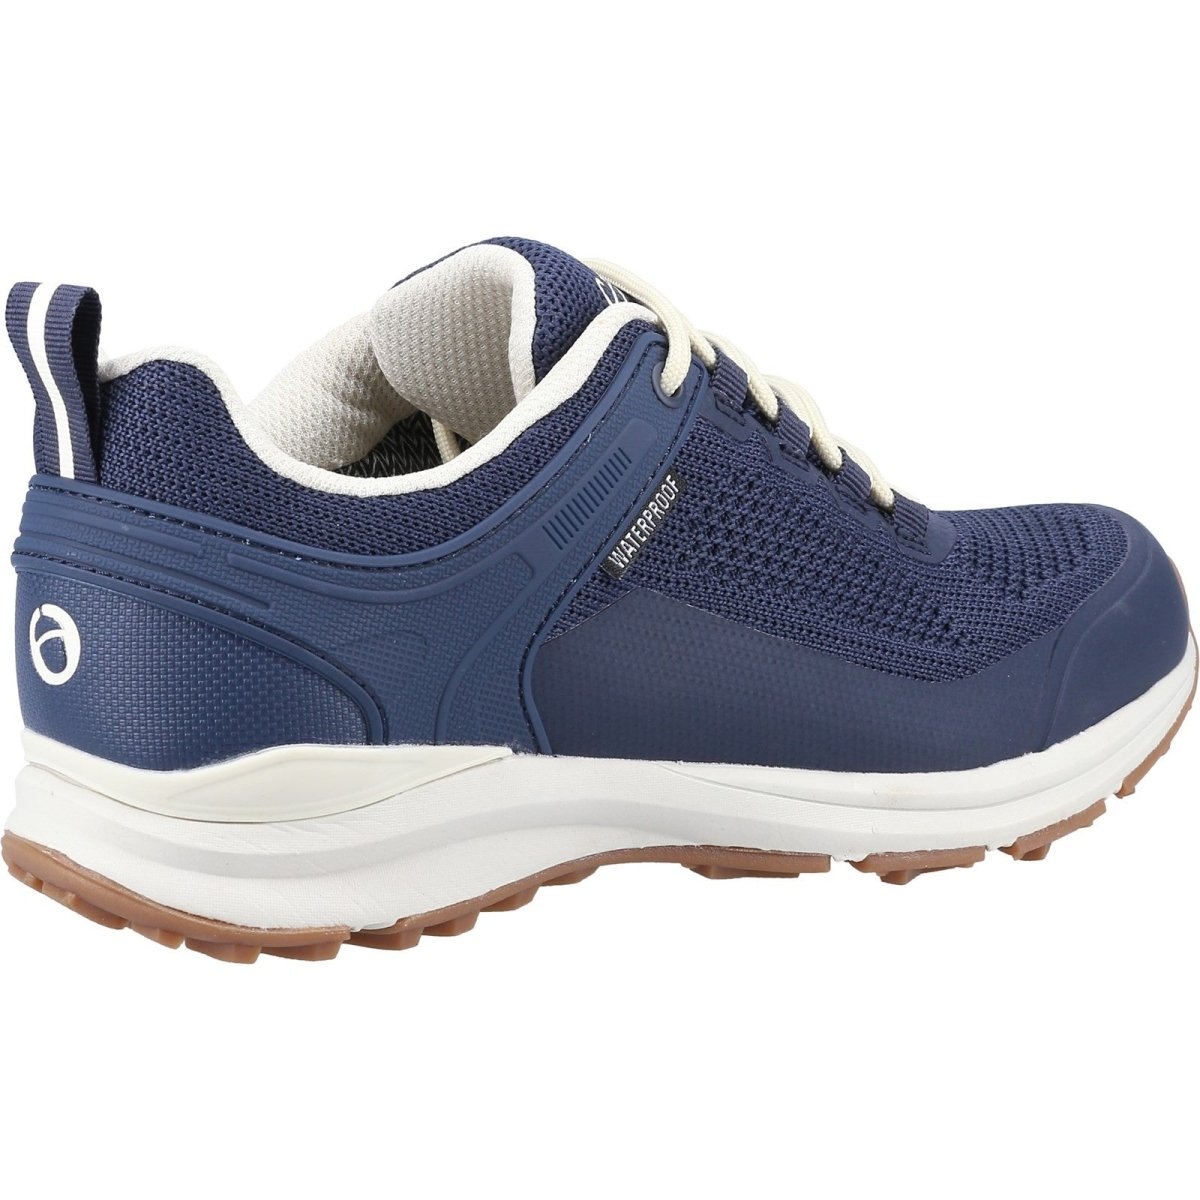 Cotswold Compton Ladies Waterproof Hiking Trainers - Shoe Store Direct